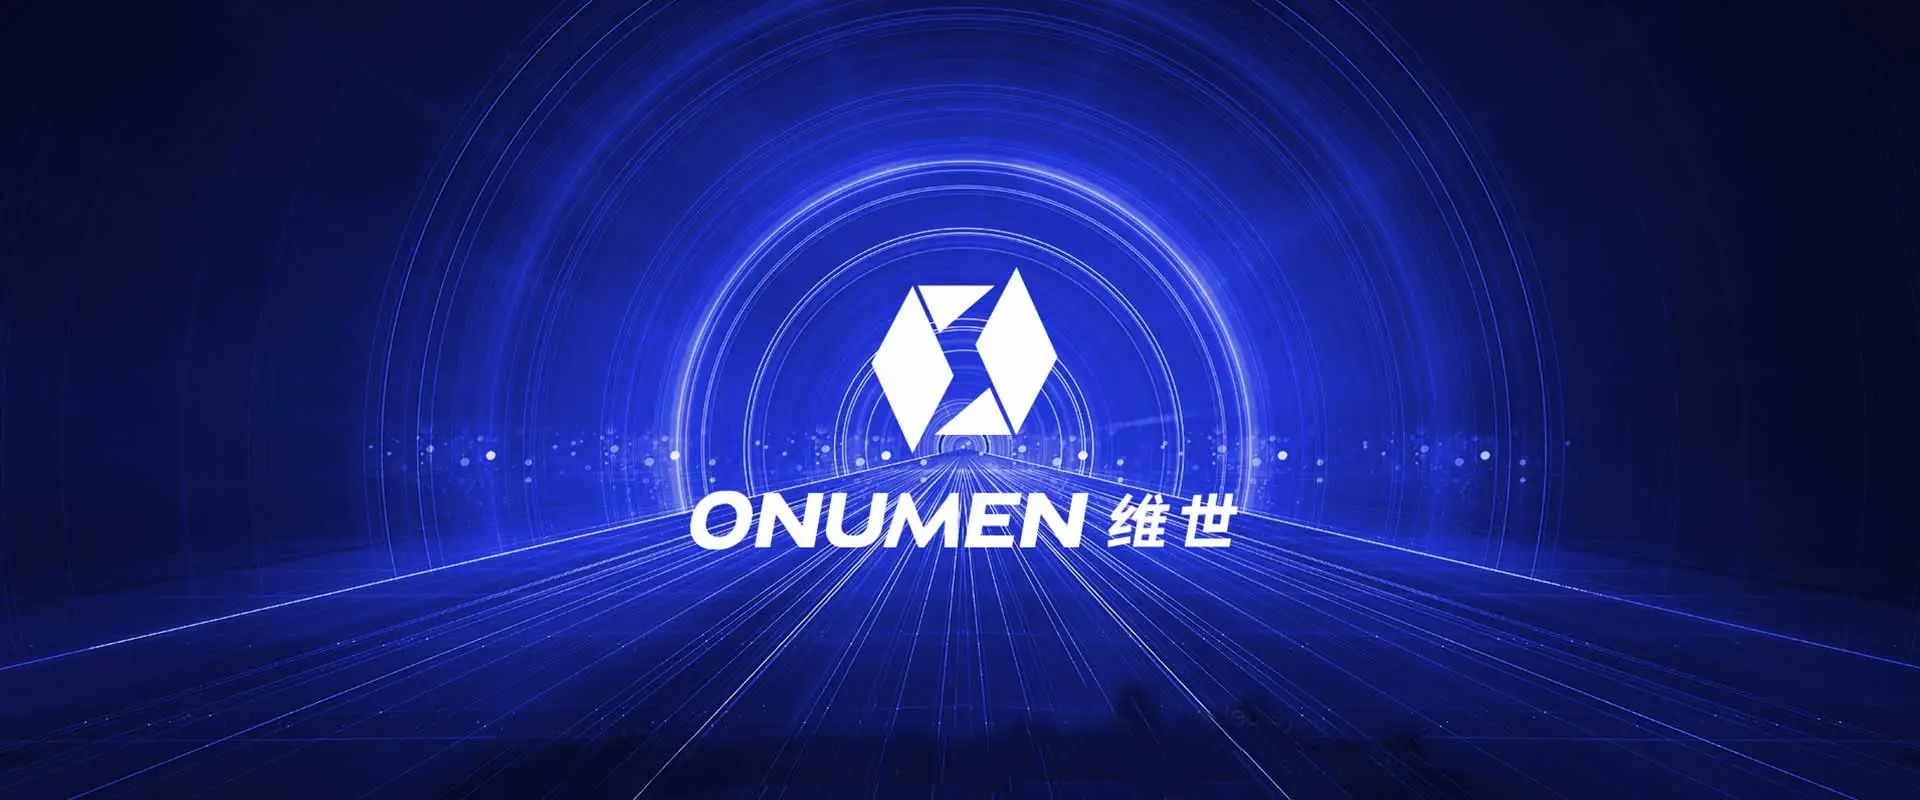 Onumen is the world leader in Portable and Foldable LED video systems